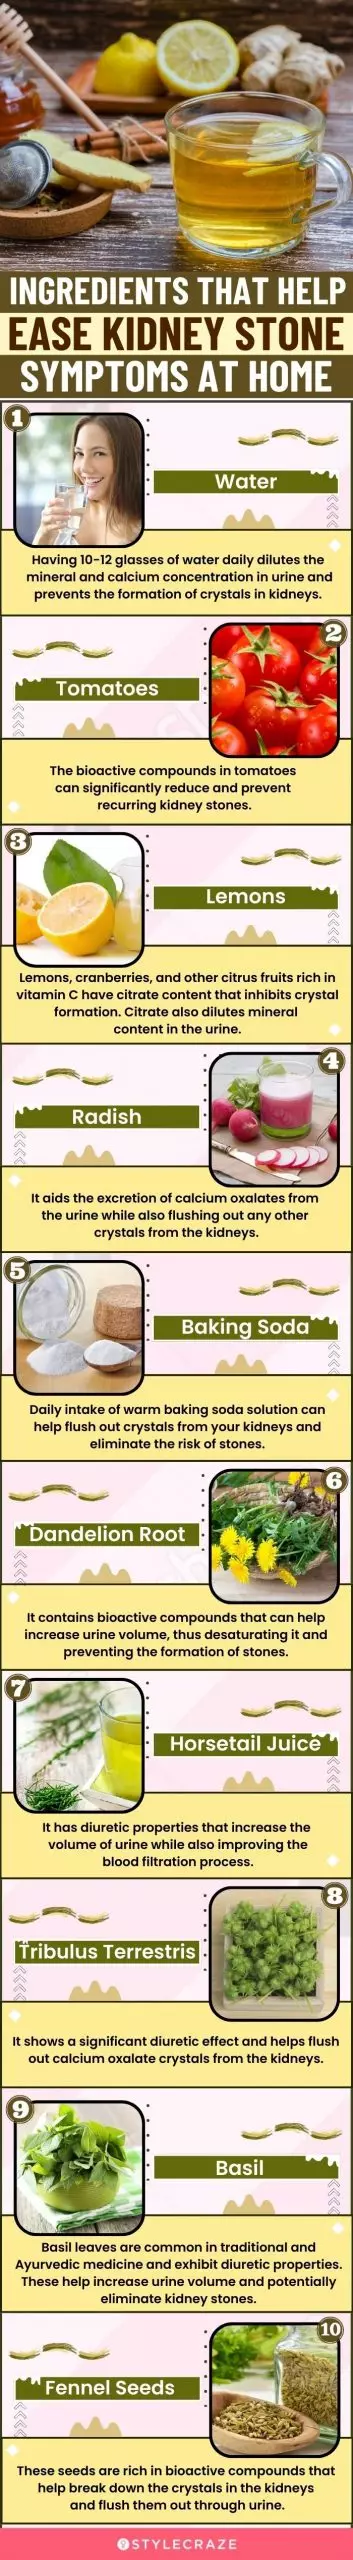 ingredients that help easy kidney stone symptoms at home (infographic)